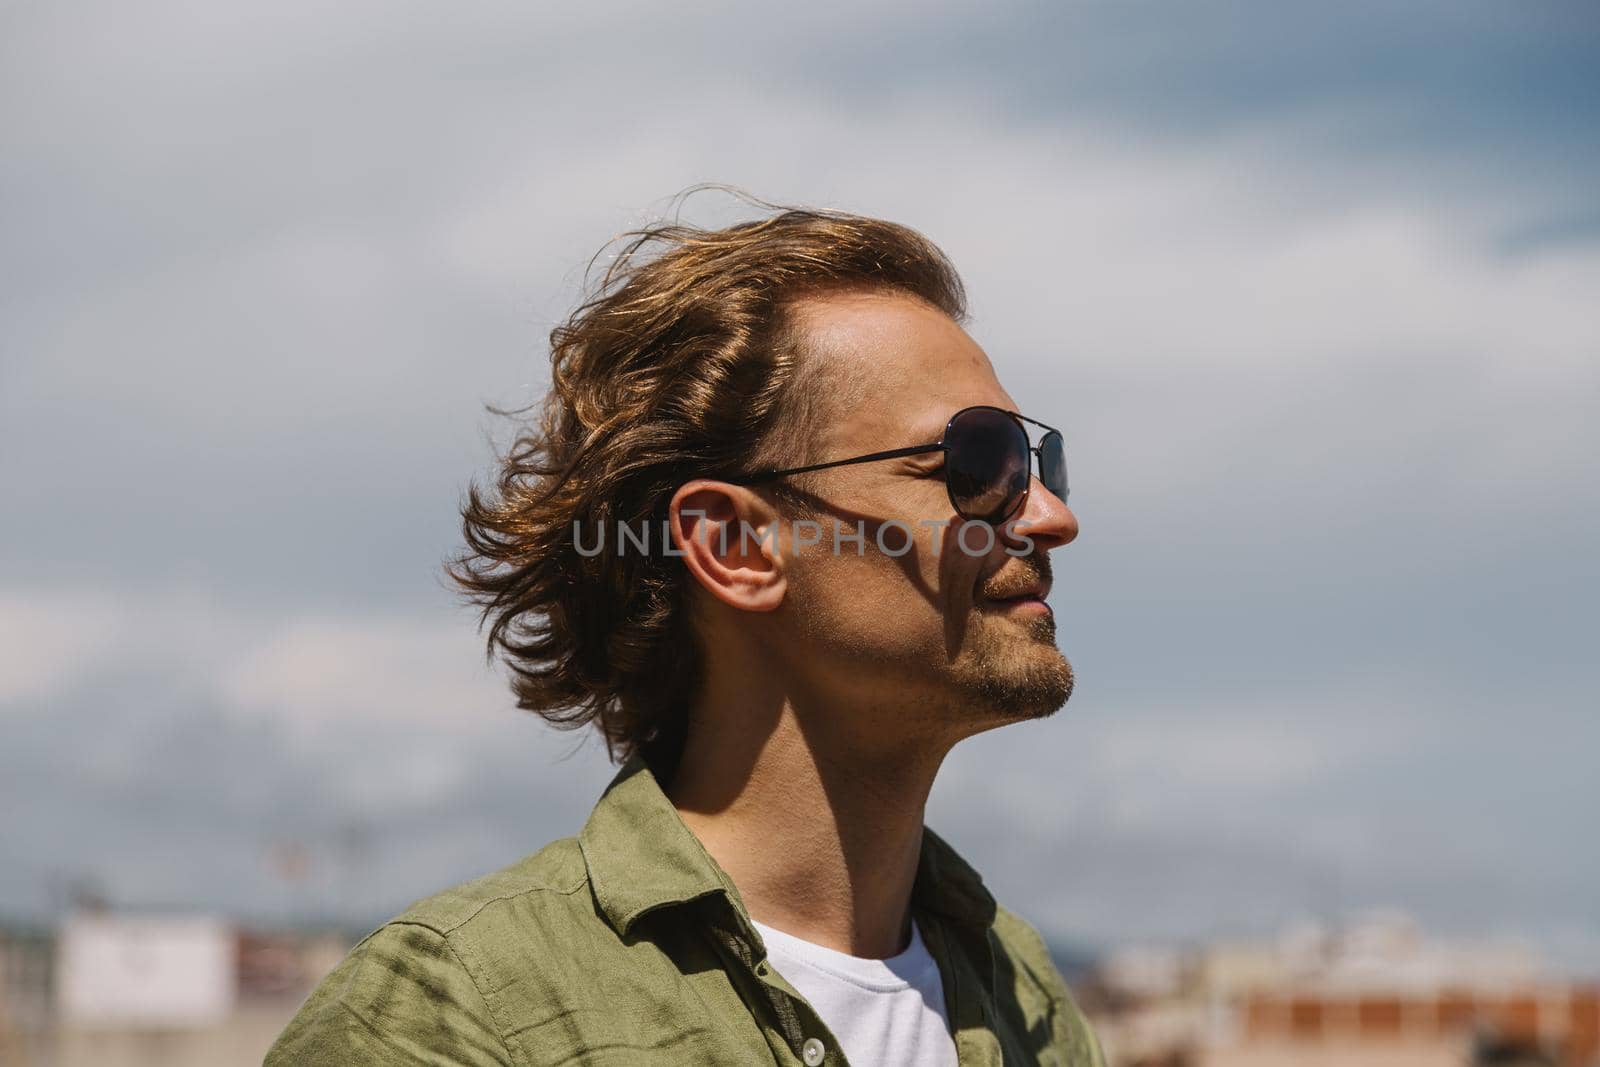 A happy man in sunglasses with long hair, standing outdoors on sunny day, smiling and looking to the side. by apavlin